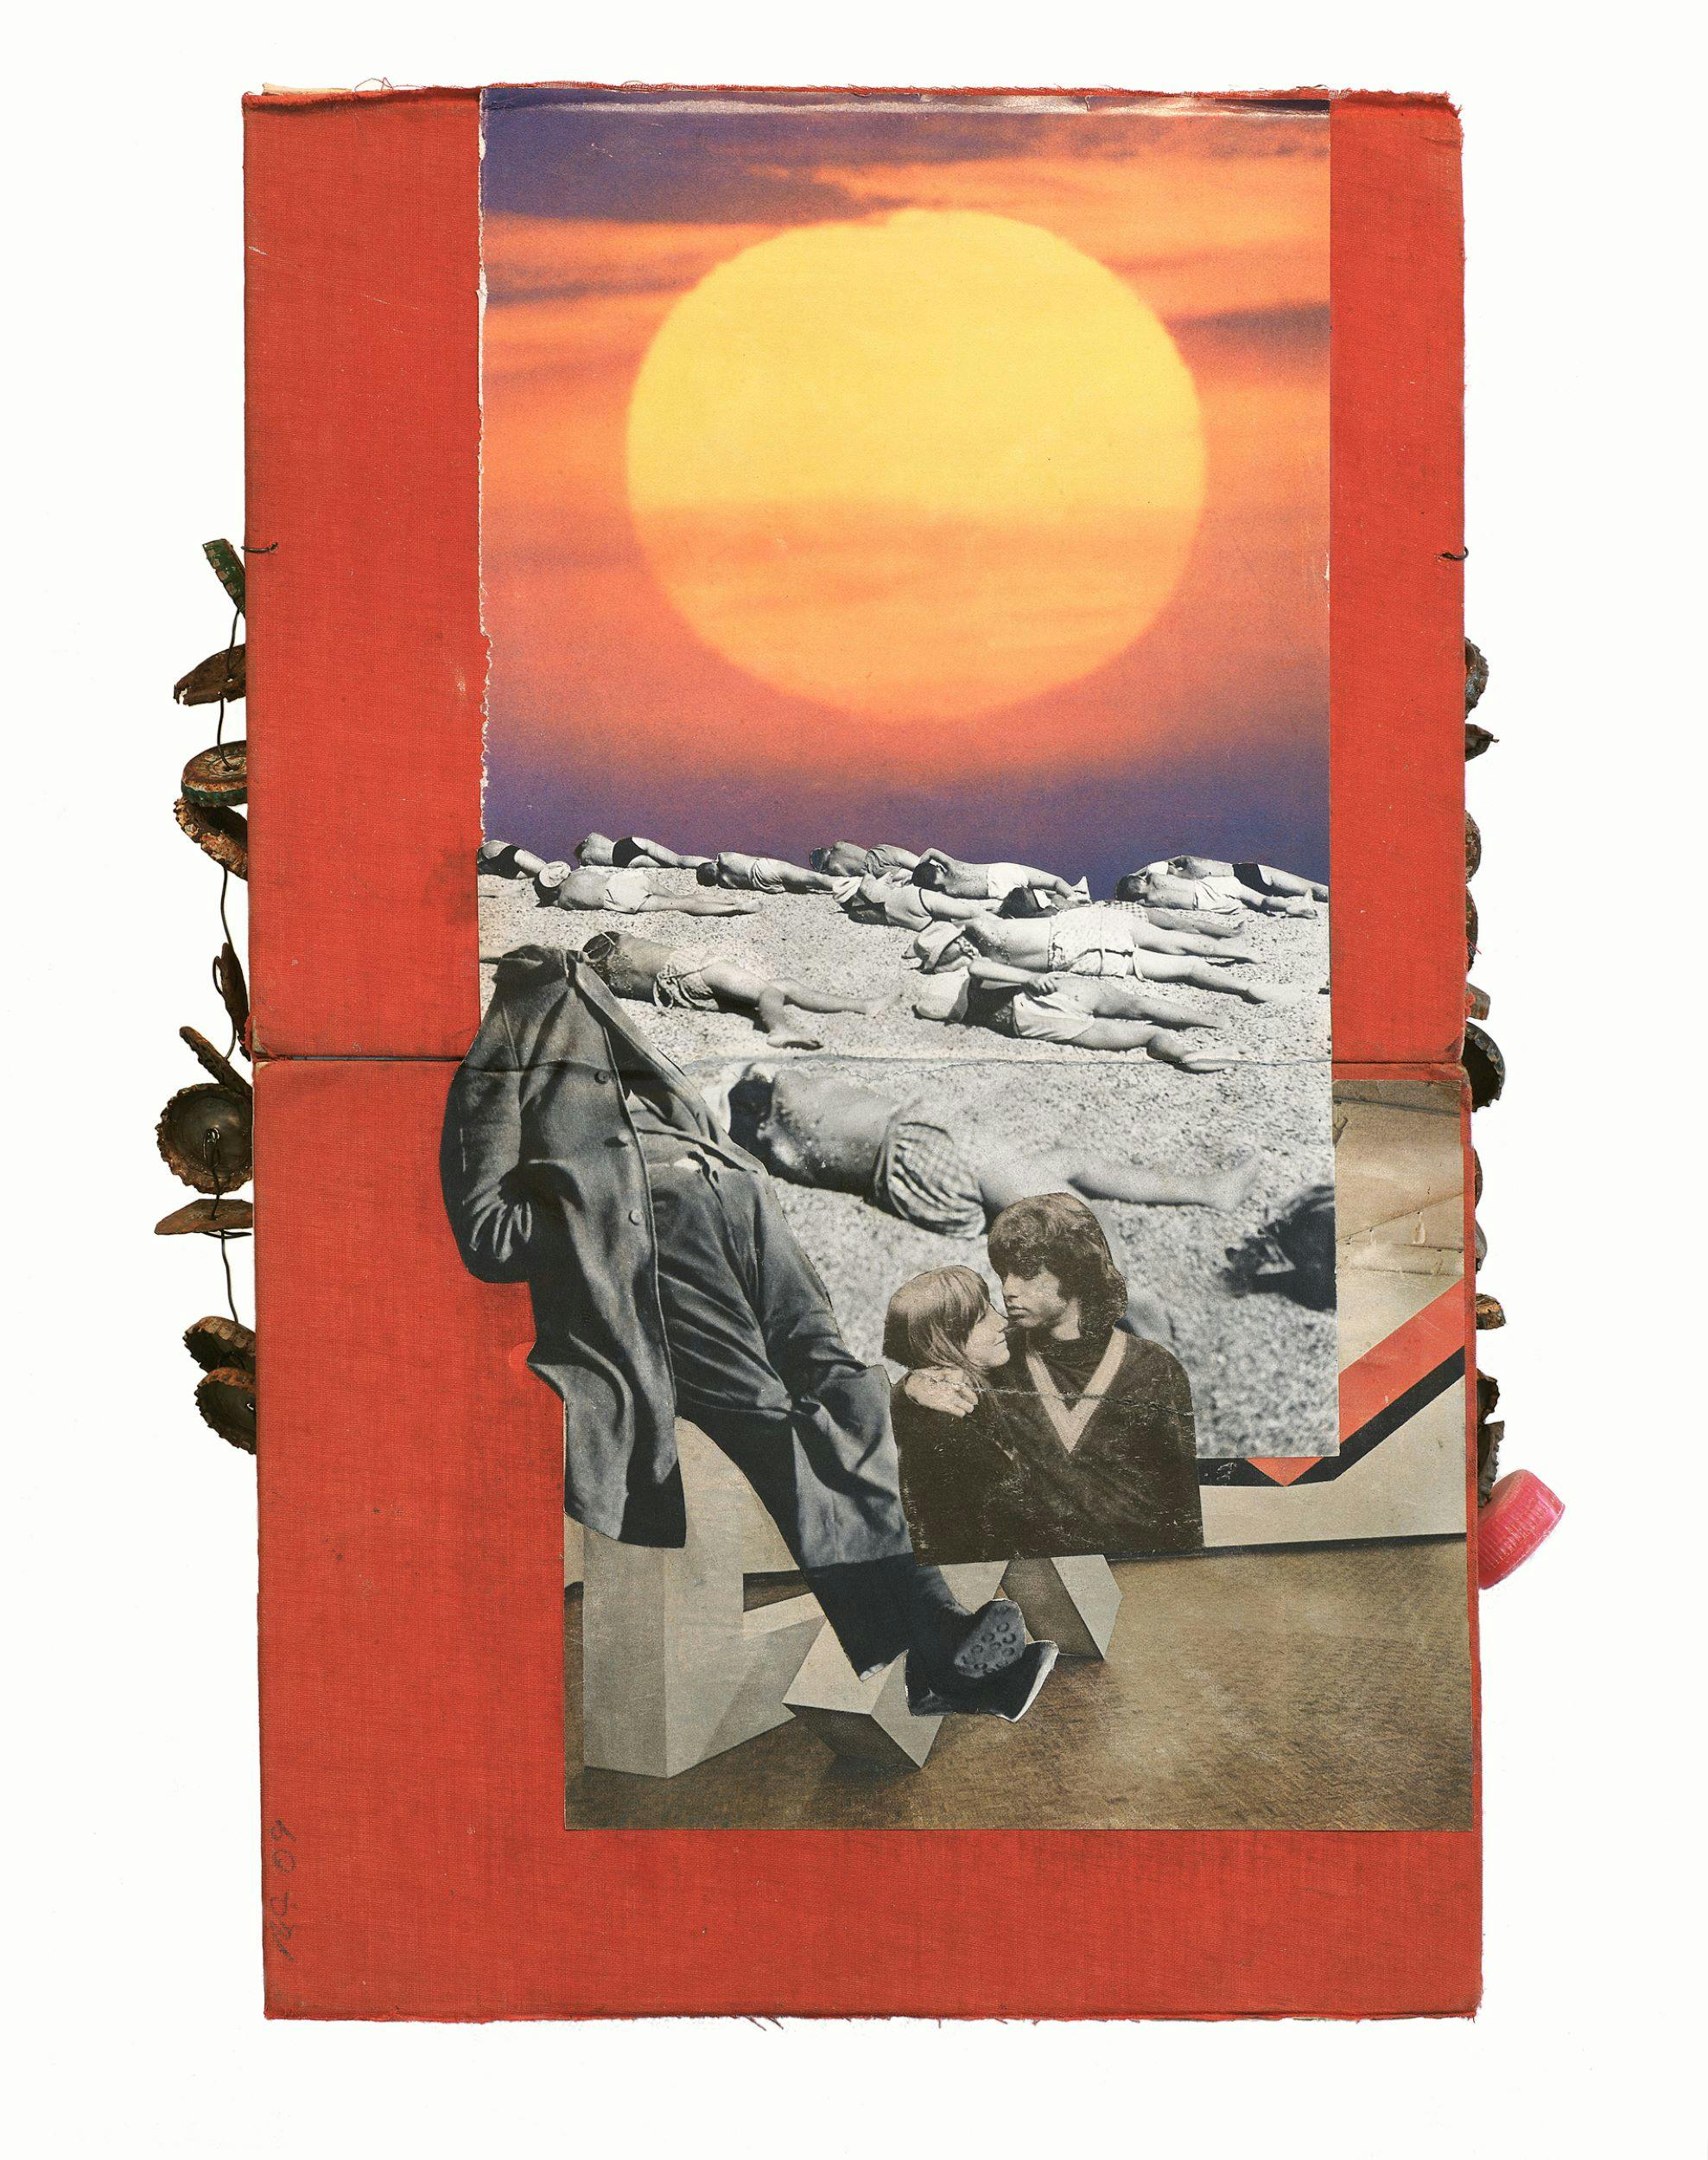 A collage of cut and pasted photographs on a red background; a sunset, black and white images of a couple, people lying on a beach, and a person in a suit all overtop of an image of a gallery space.